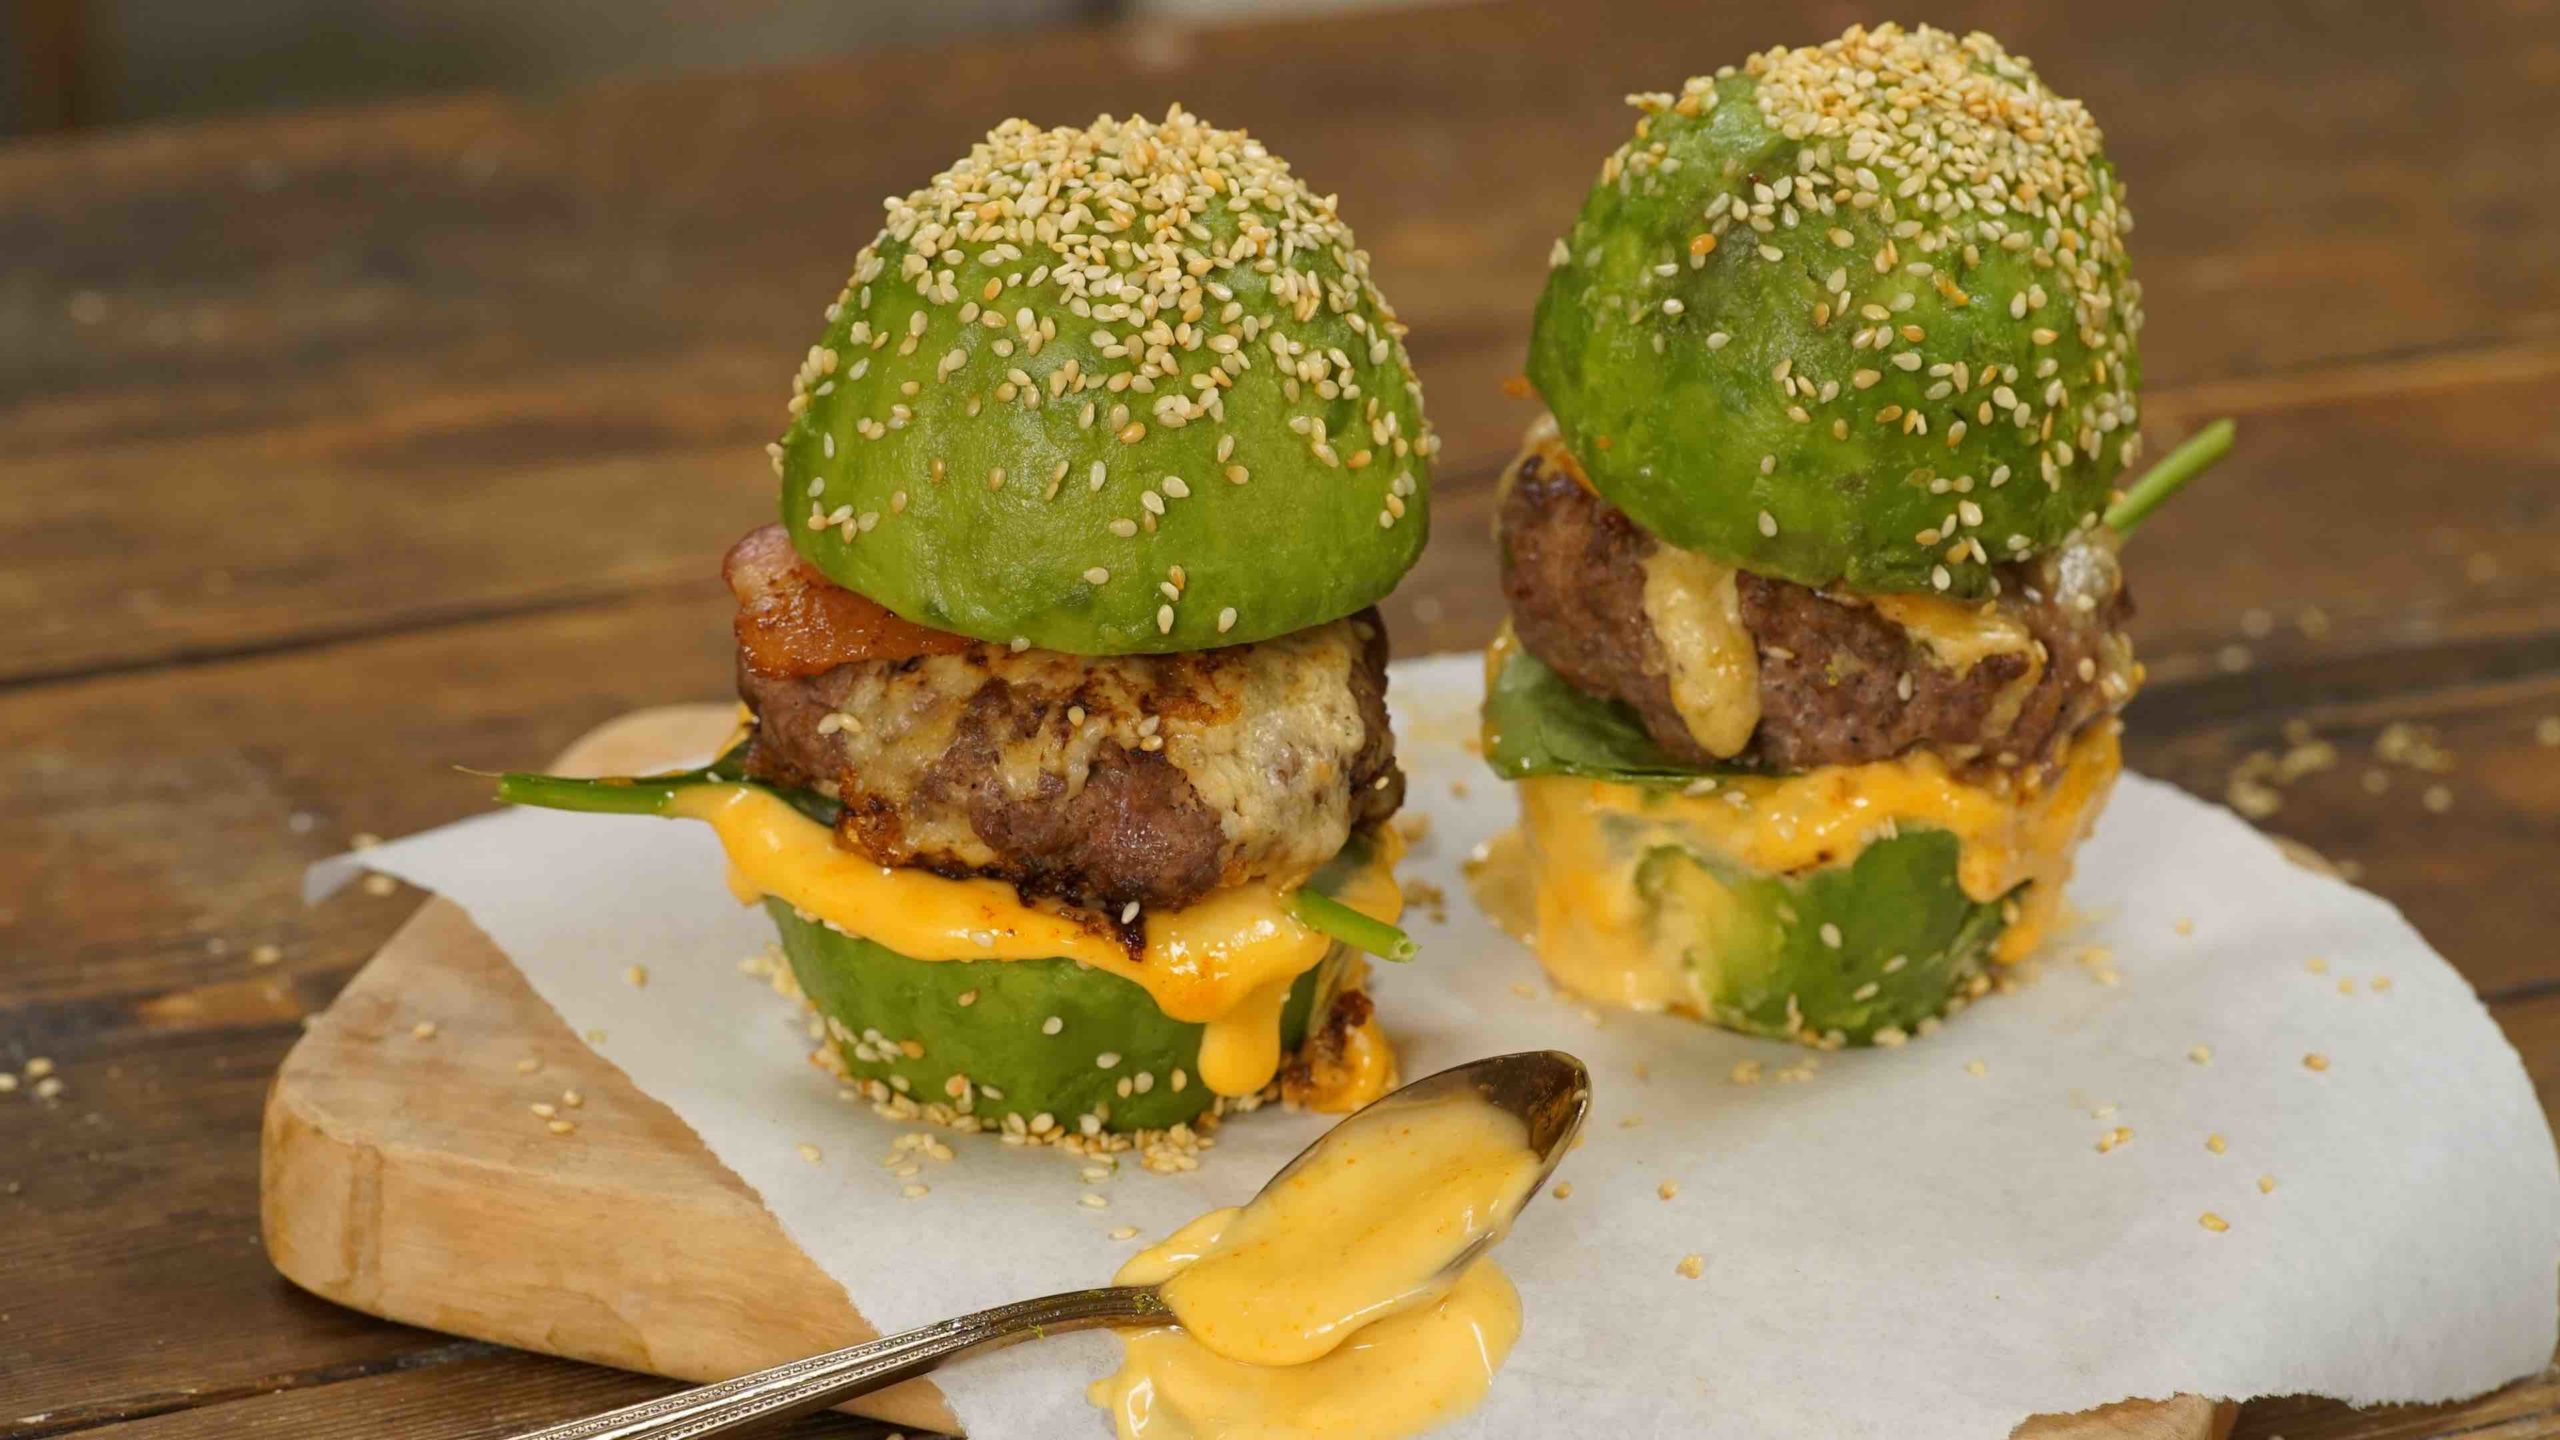 Two burgers with avocado buns instead of bread buns